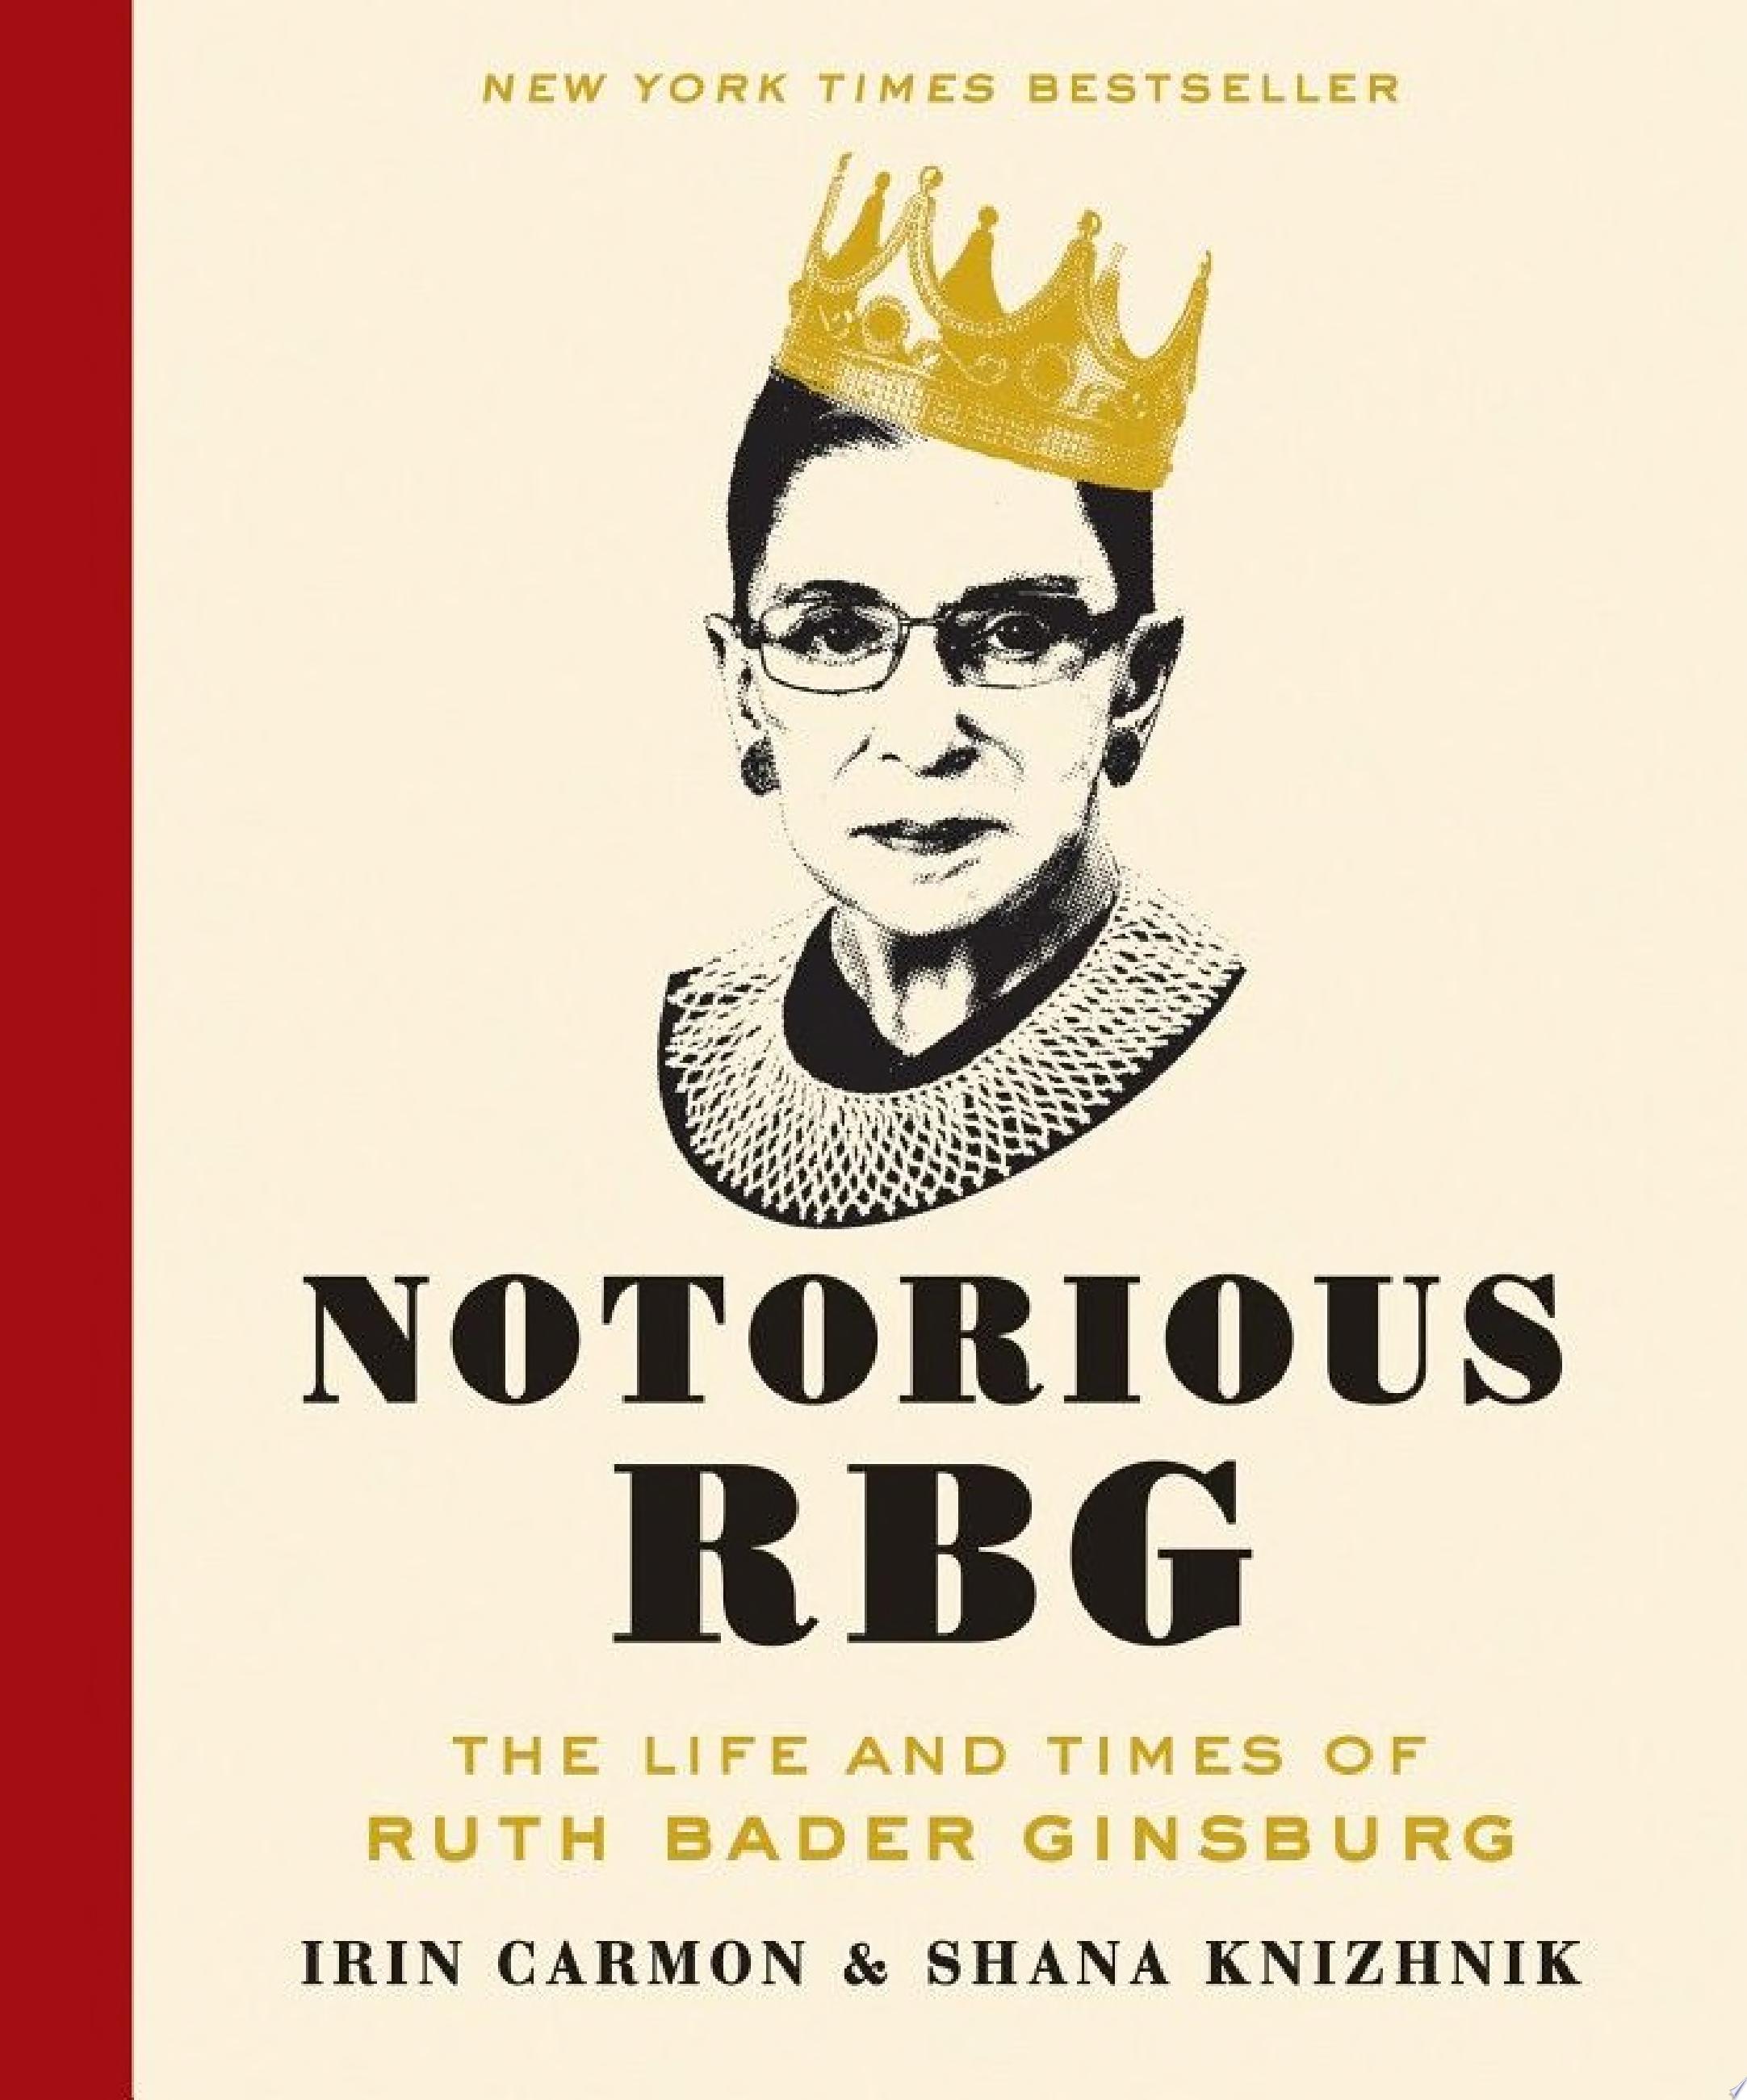 Image for "Notorious RBG"